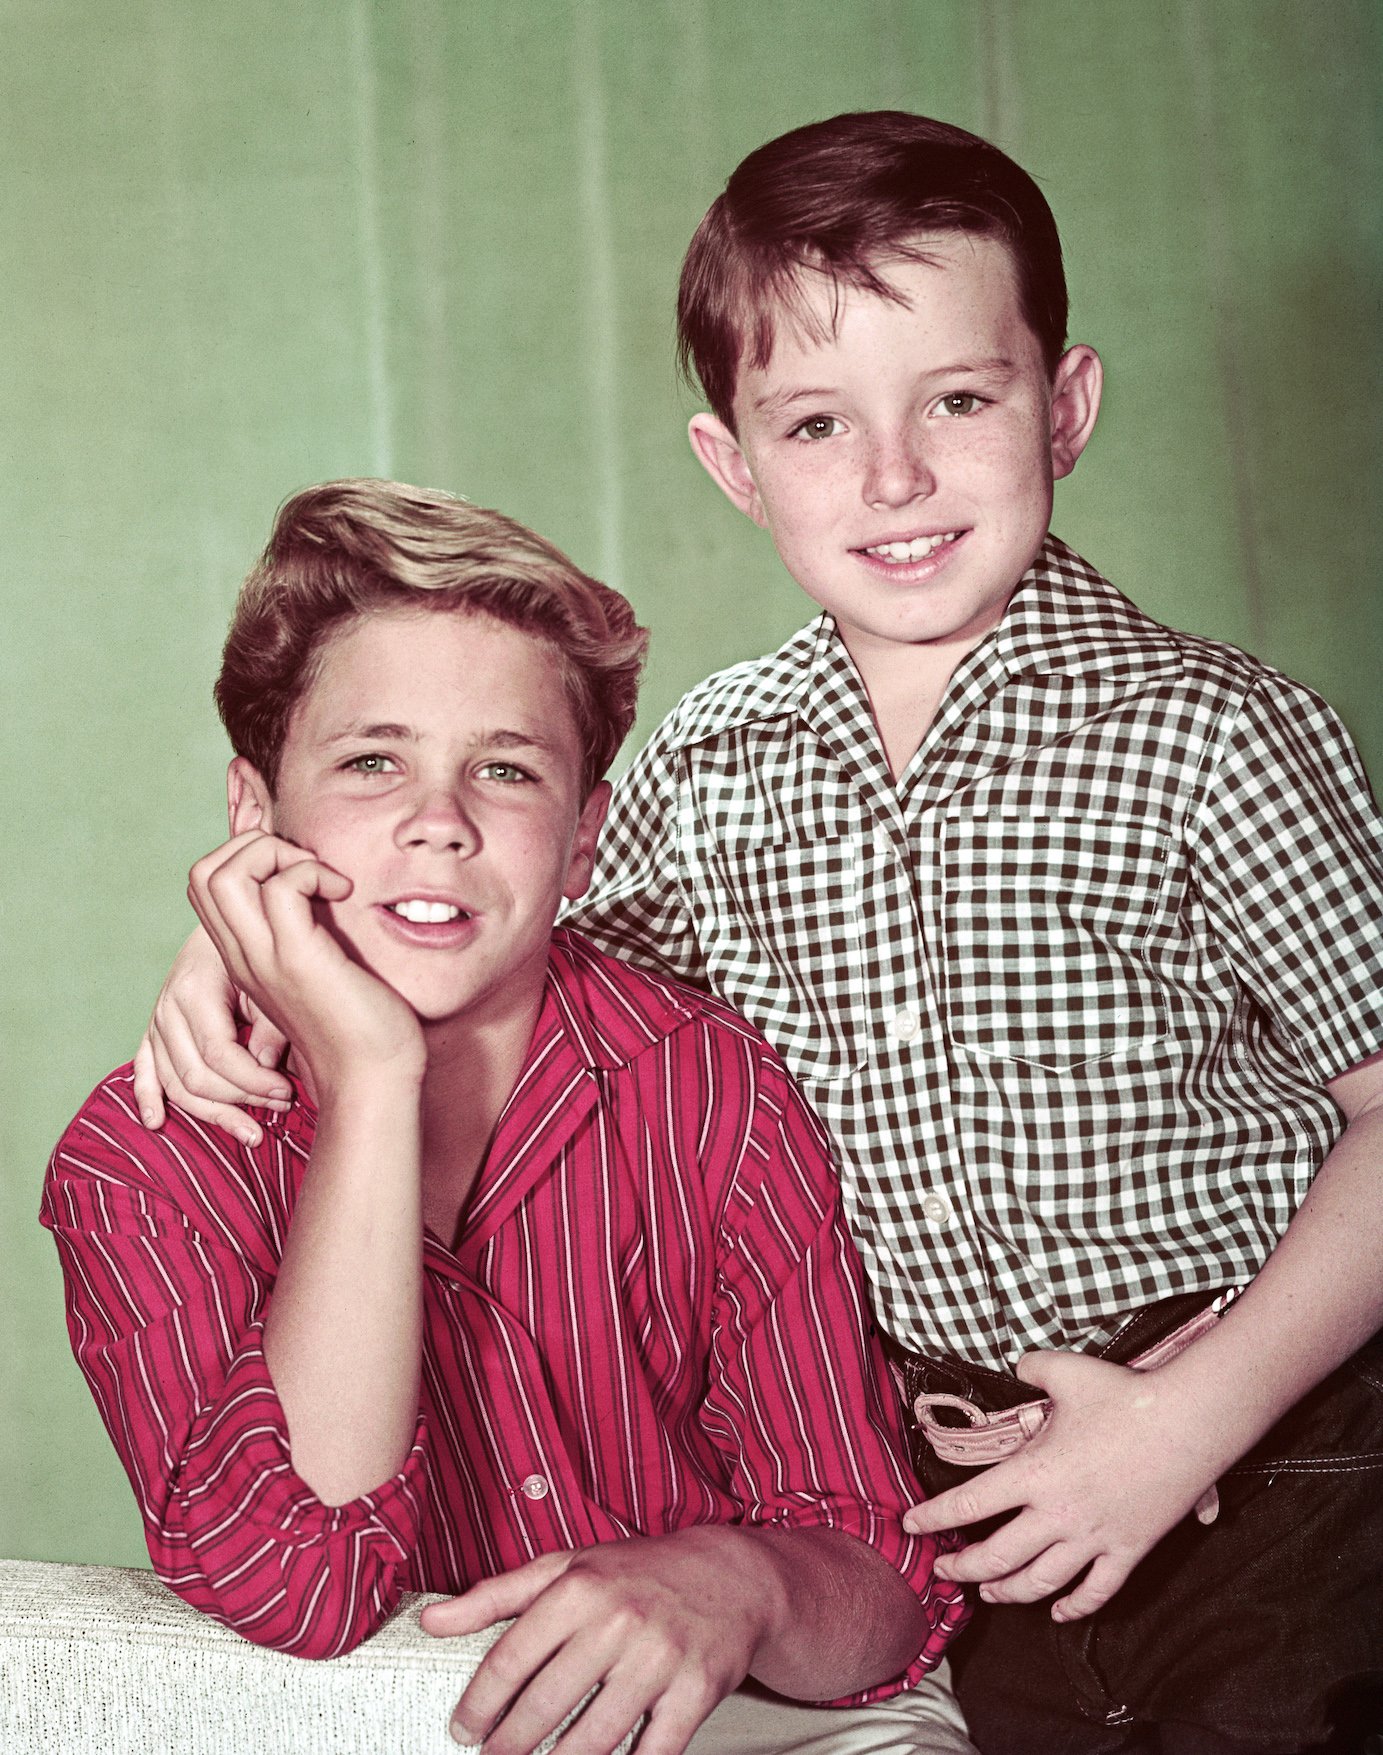 Tony Dow as Wally Cleaver and Jerry Mathers as Theodore 'Beaver' Cleaver in 'Leave It To Beaver'